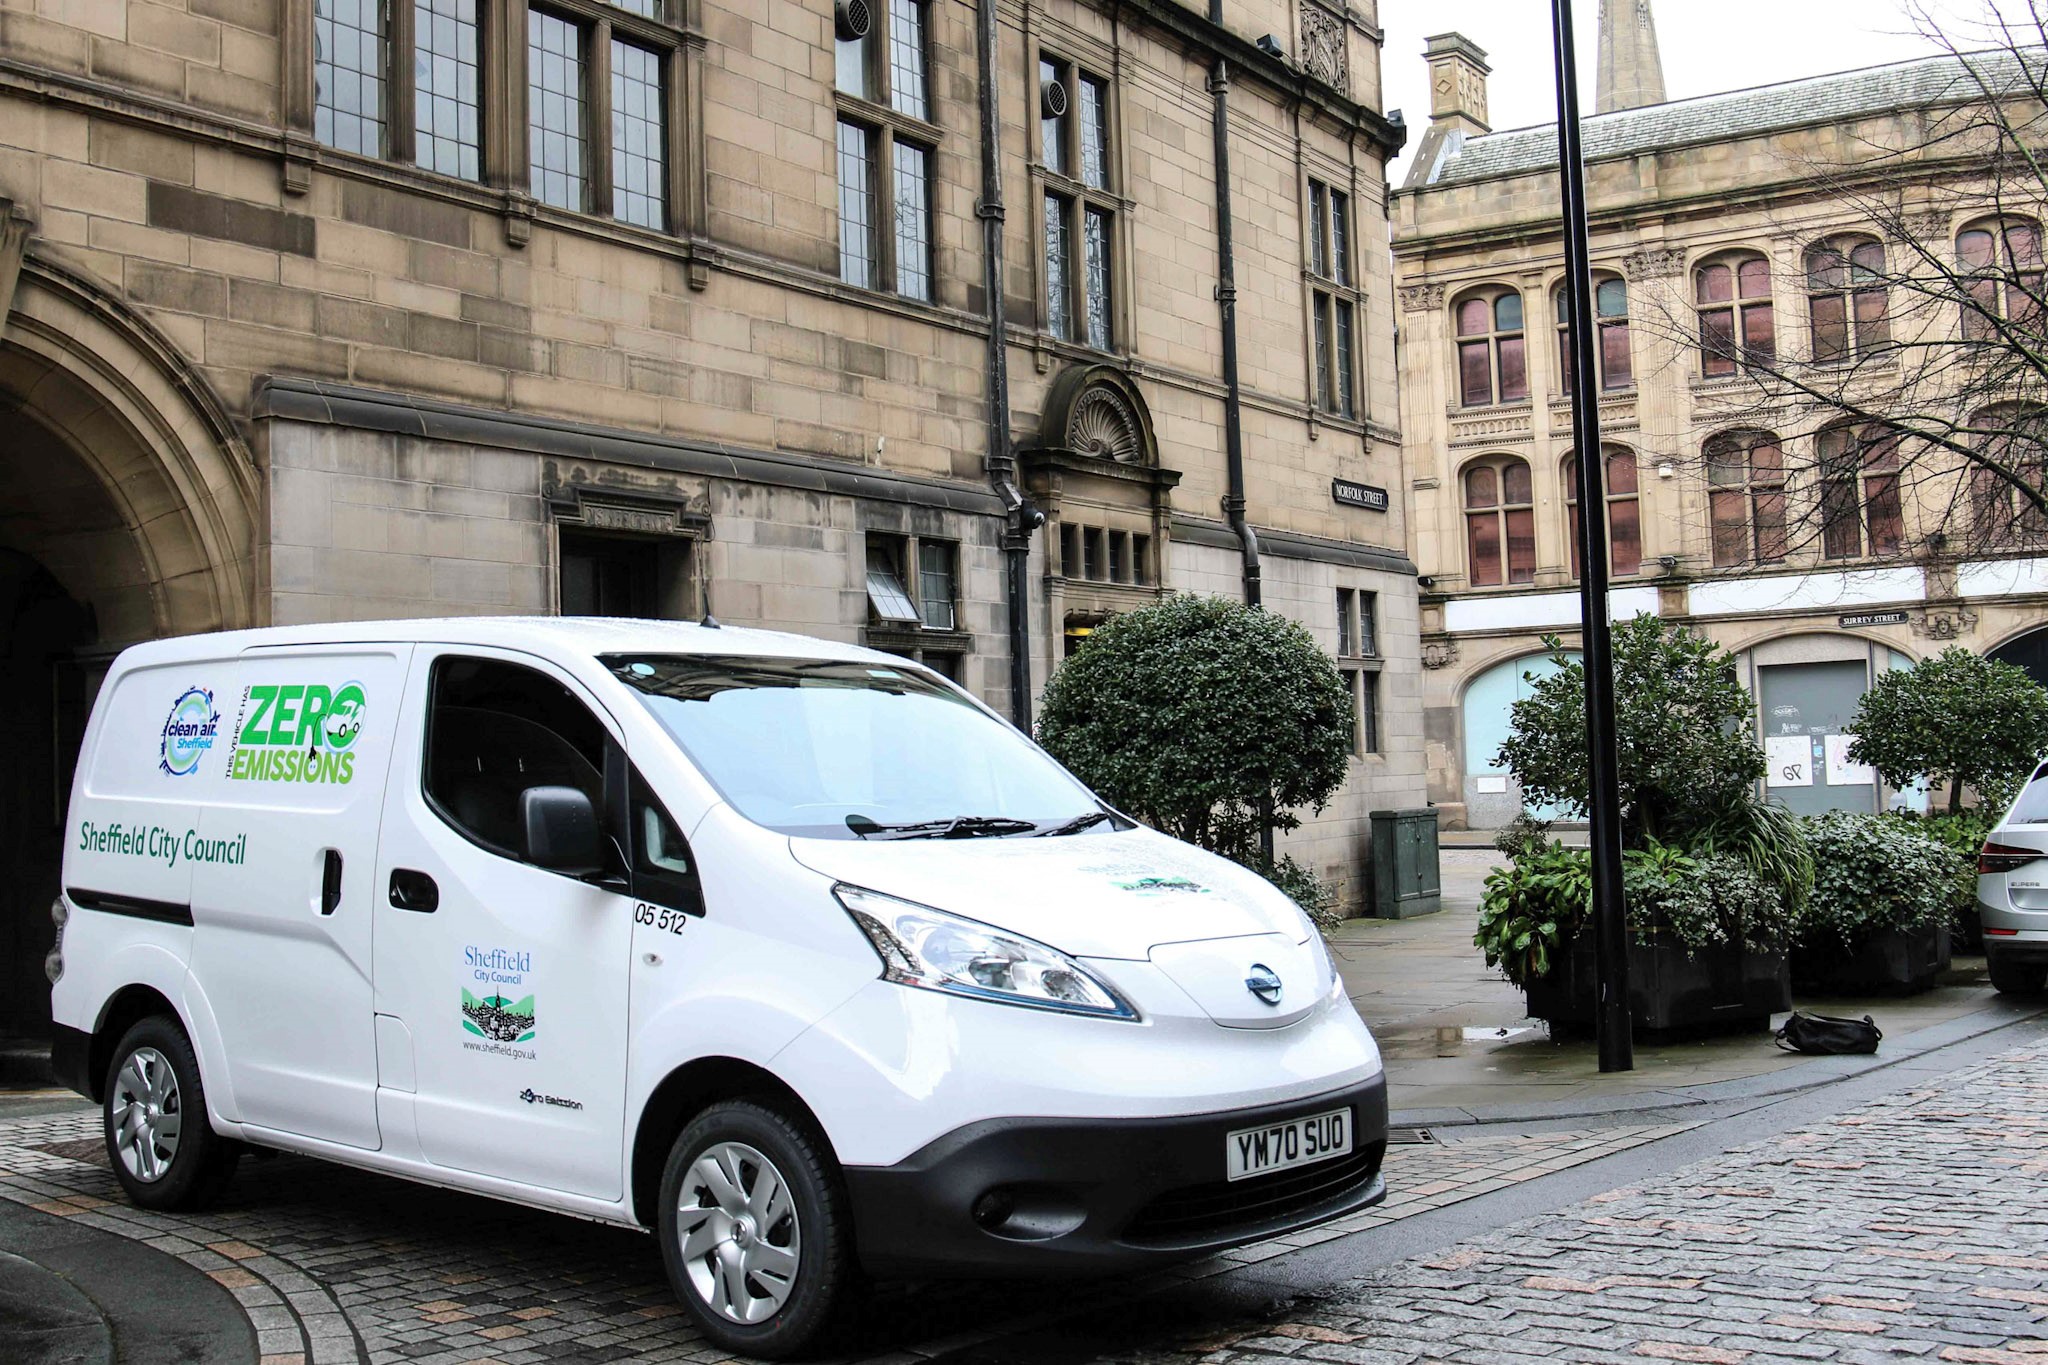 Van parked in front of Sheffield Town Hall